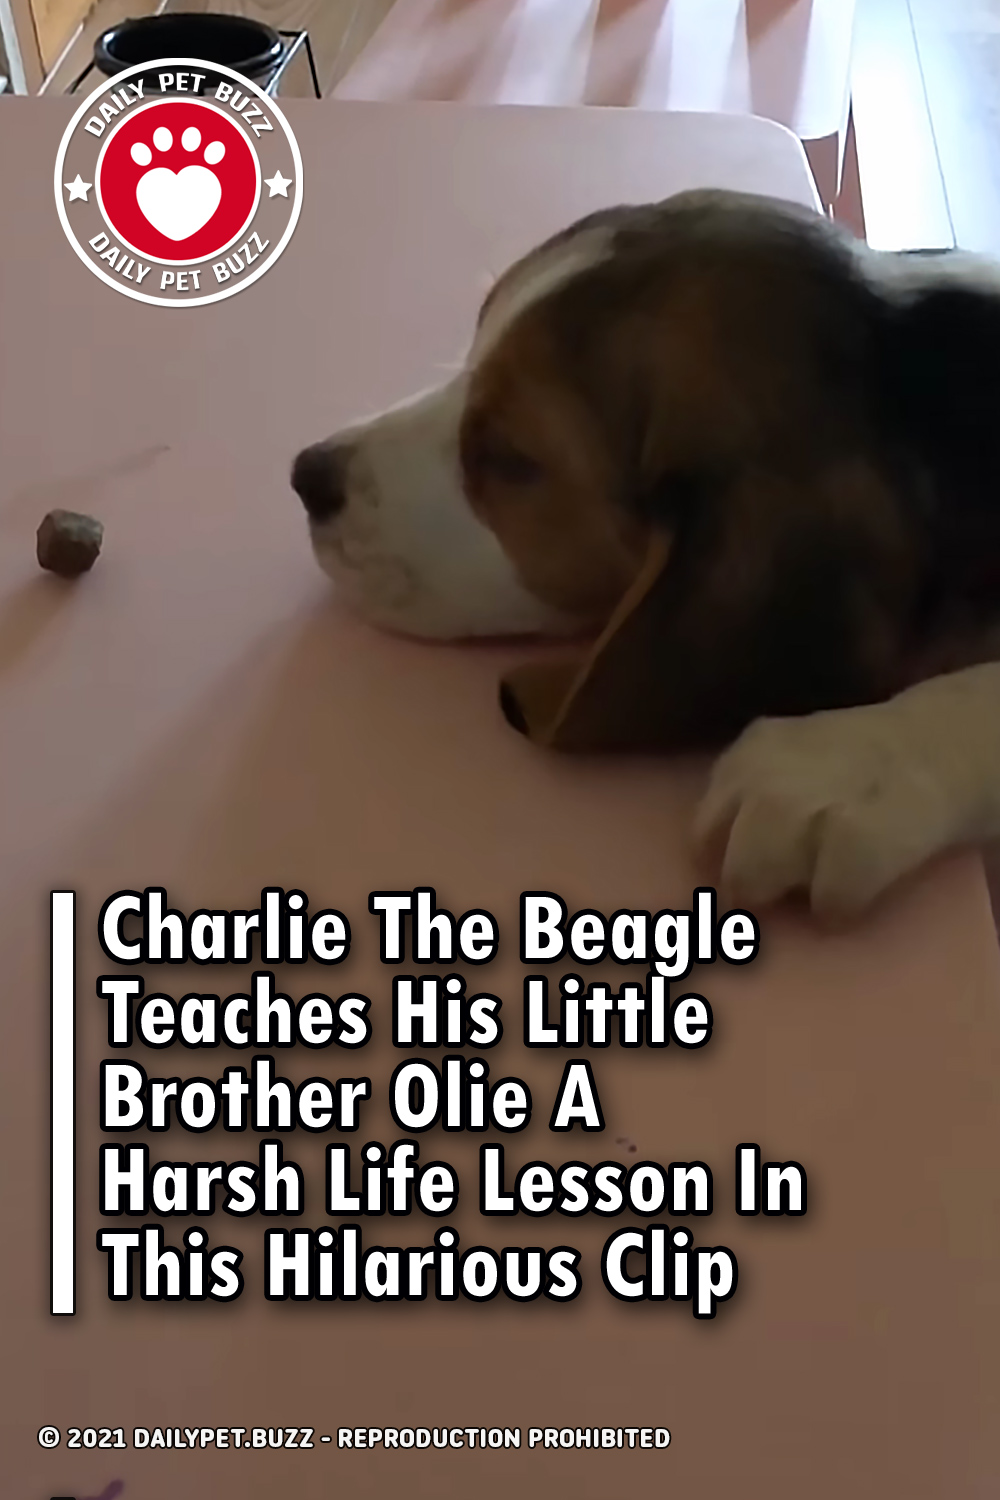 Charlie The Beagle Teaches His Little Brother Olie A Harsh Life Lesson In This Hilarious Clip